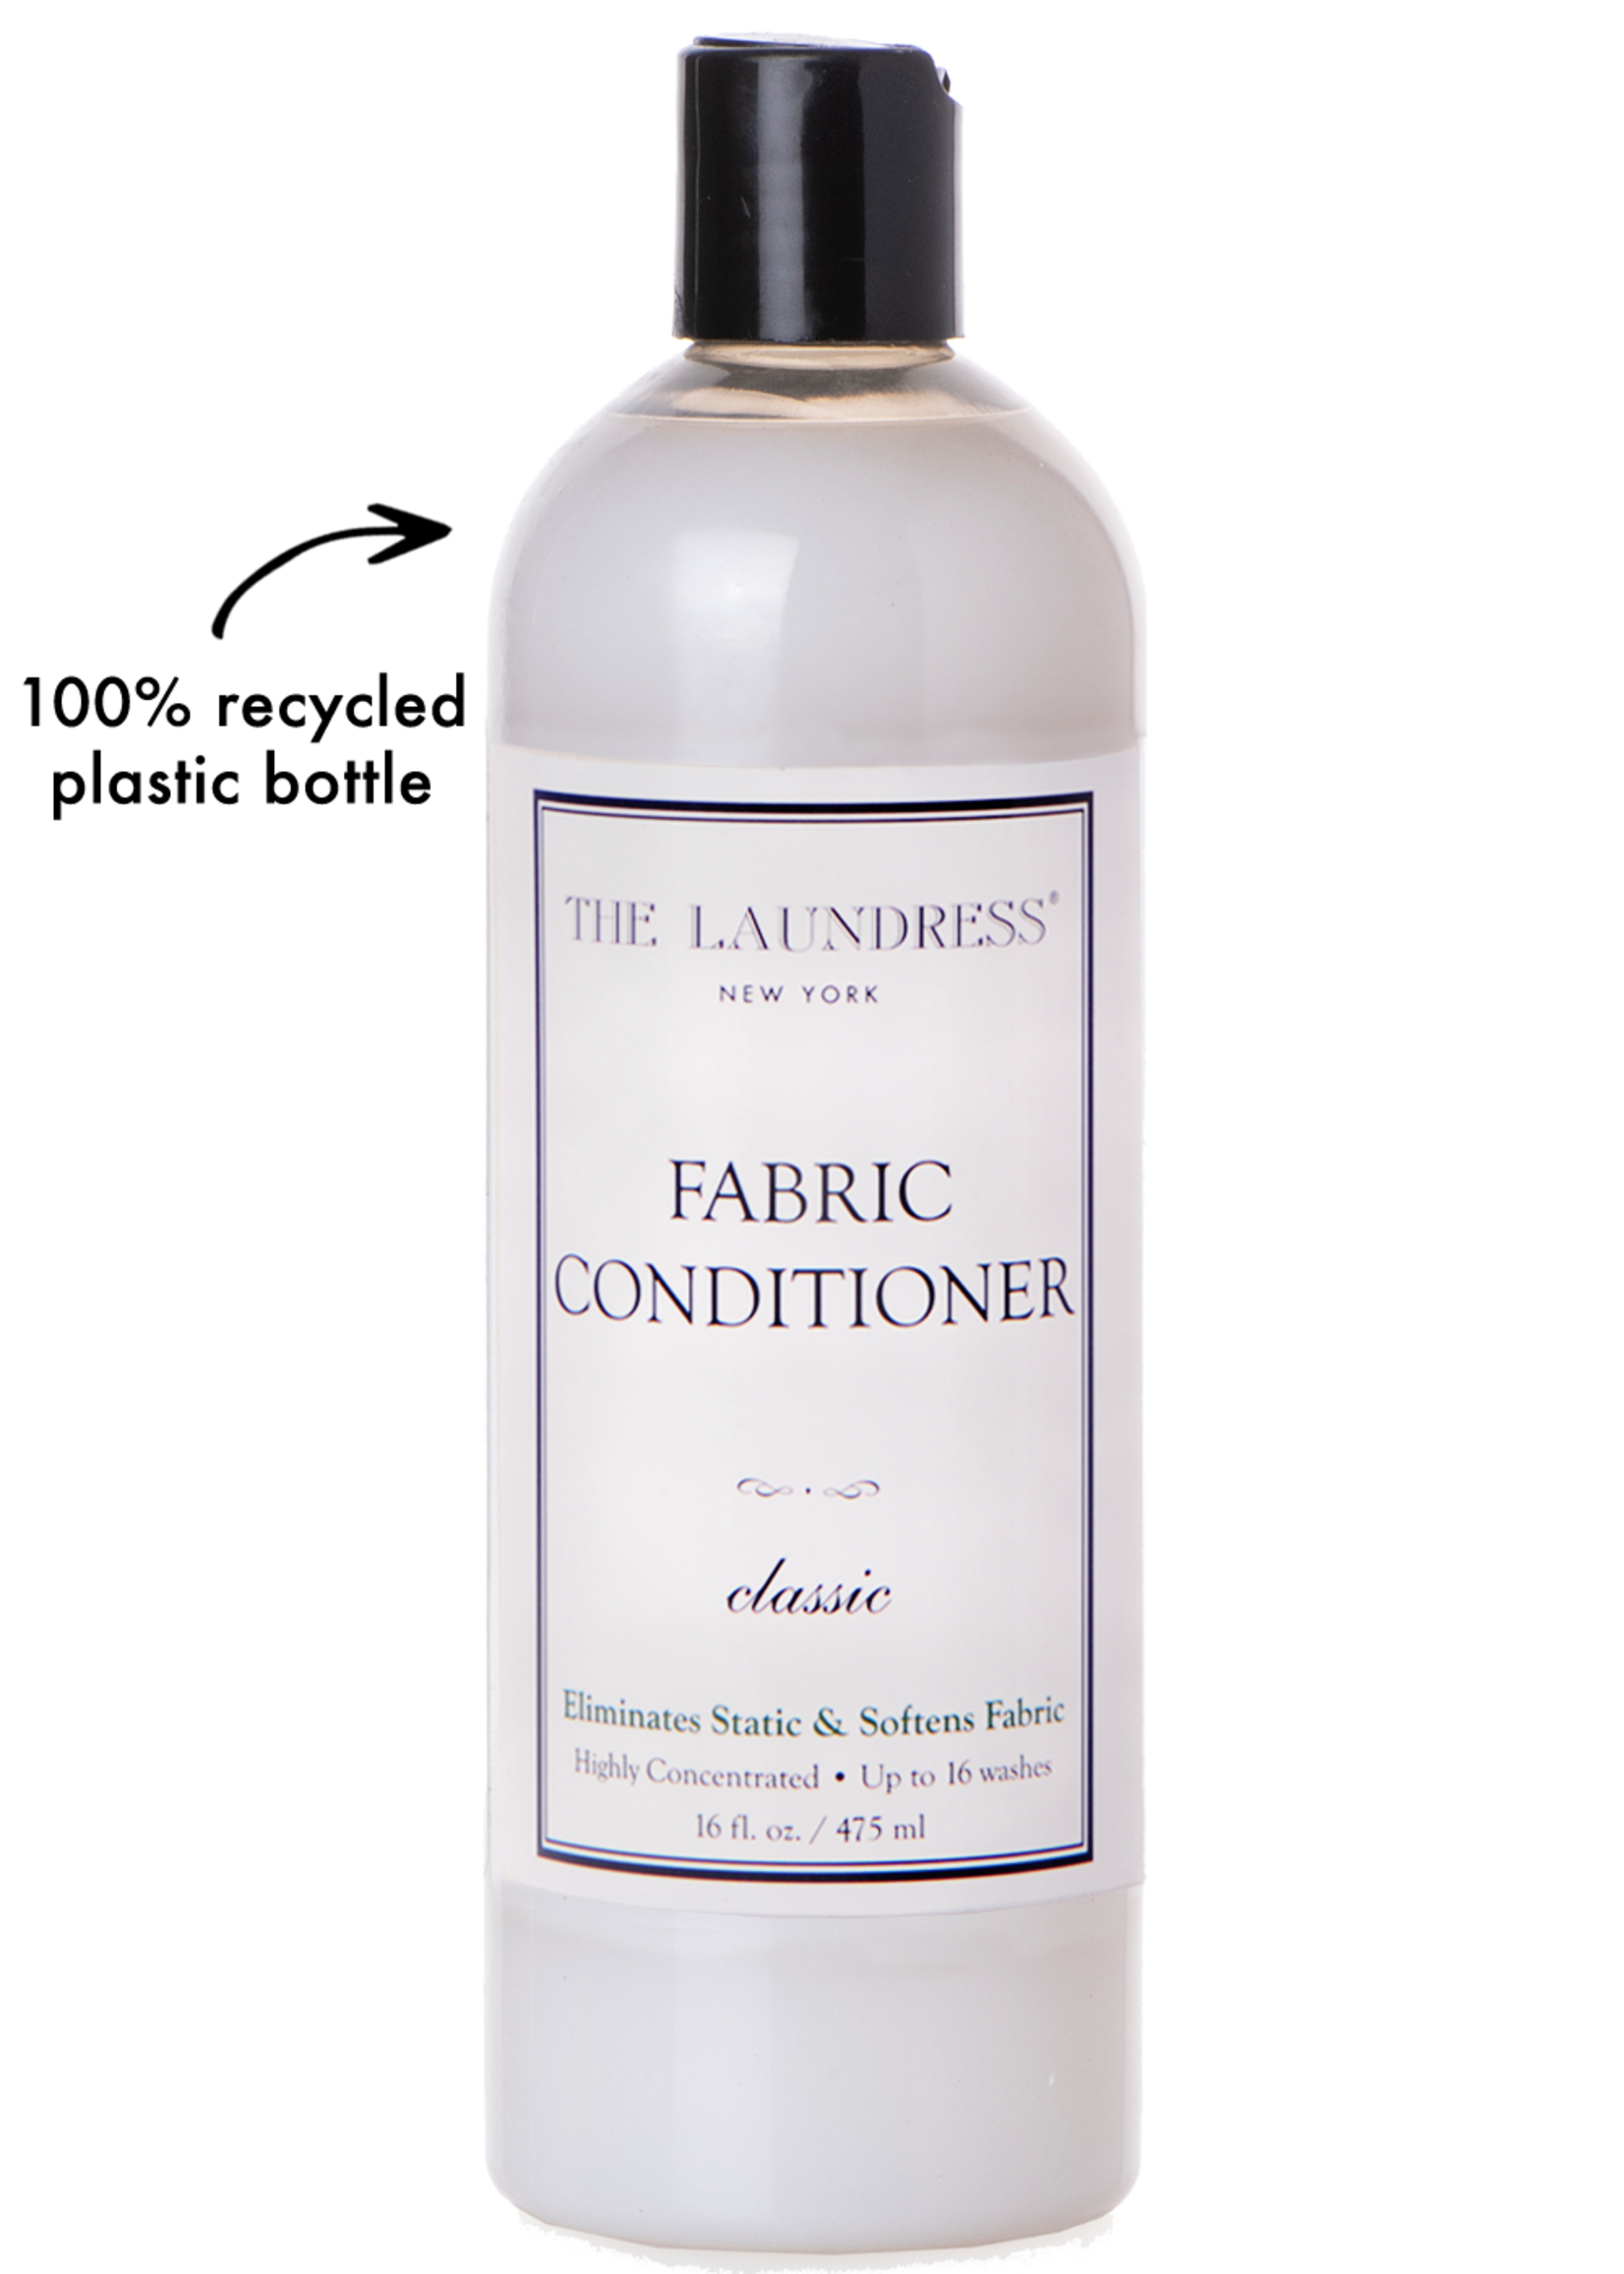 The Laundress New York Fabric Conditioner